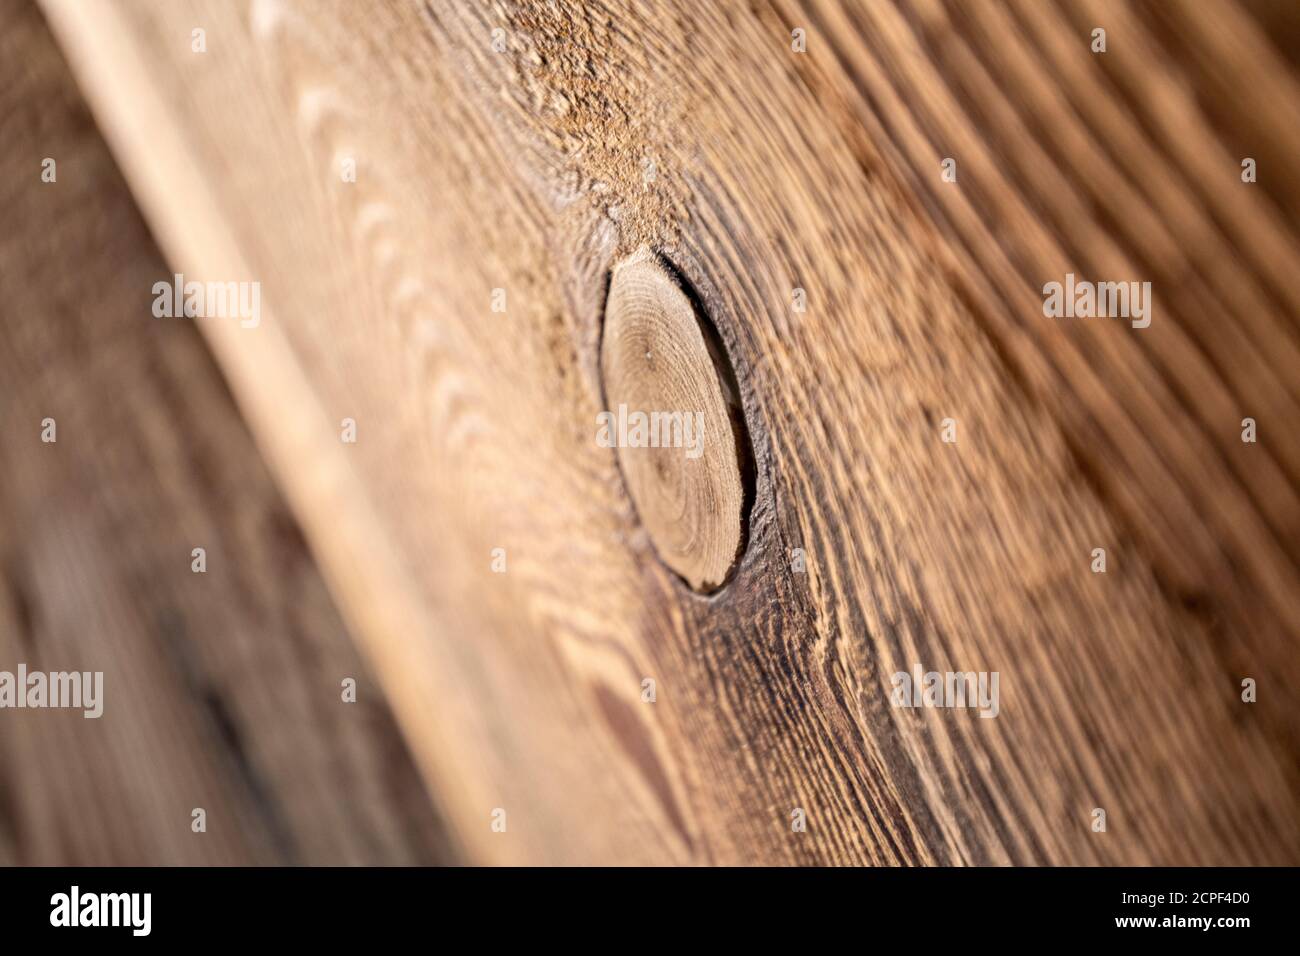 brushed wooden boards with veins, raw material, shades of brown Stock Photo